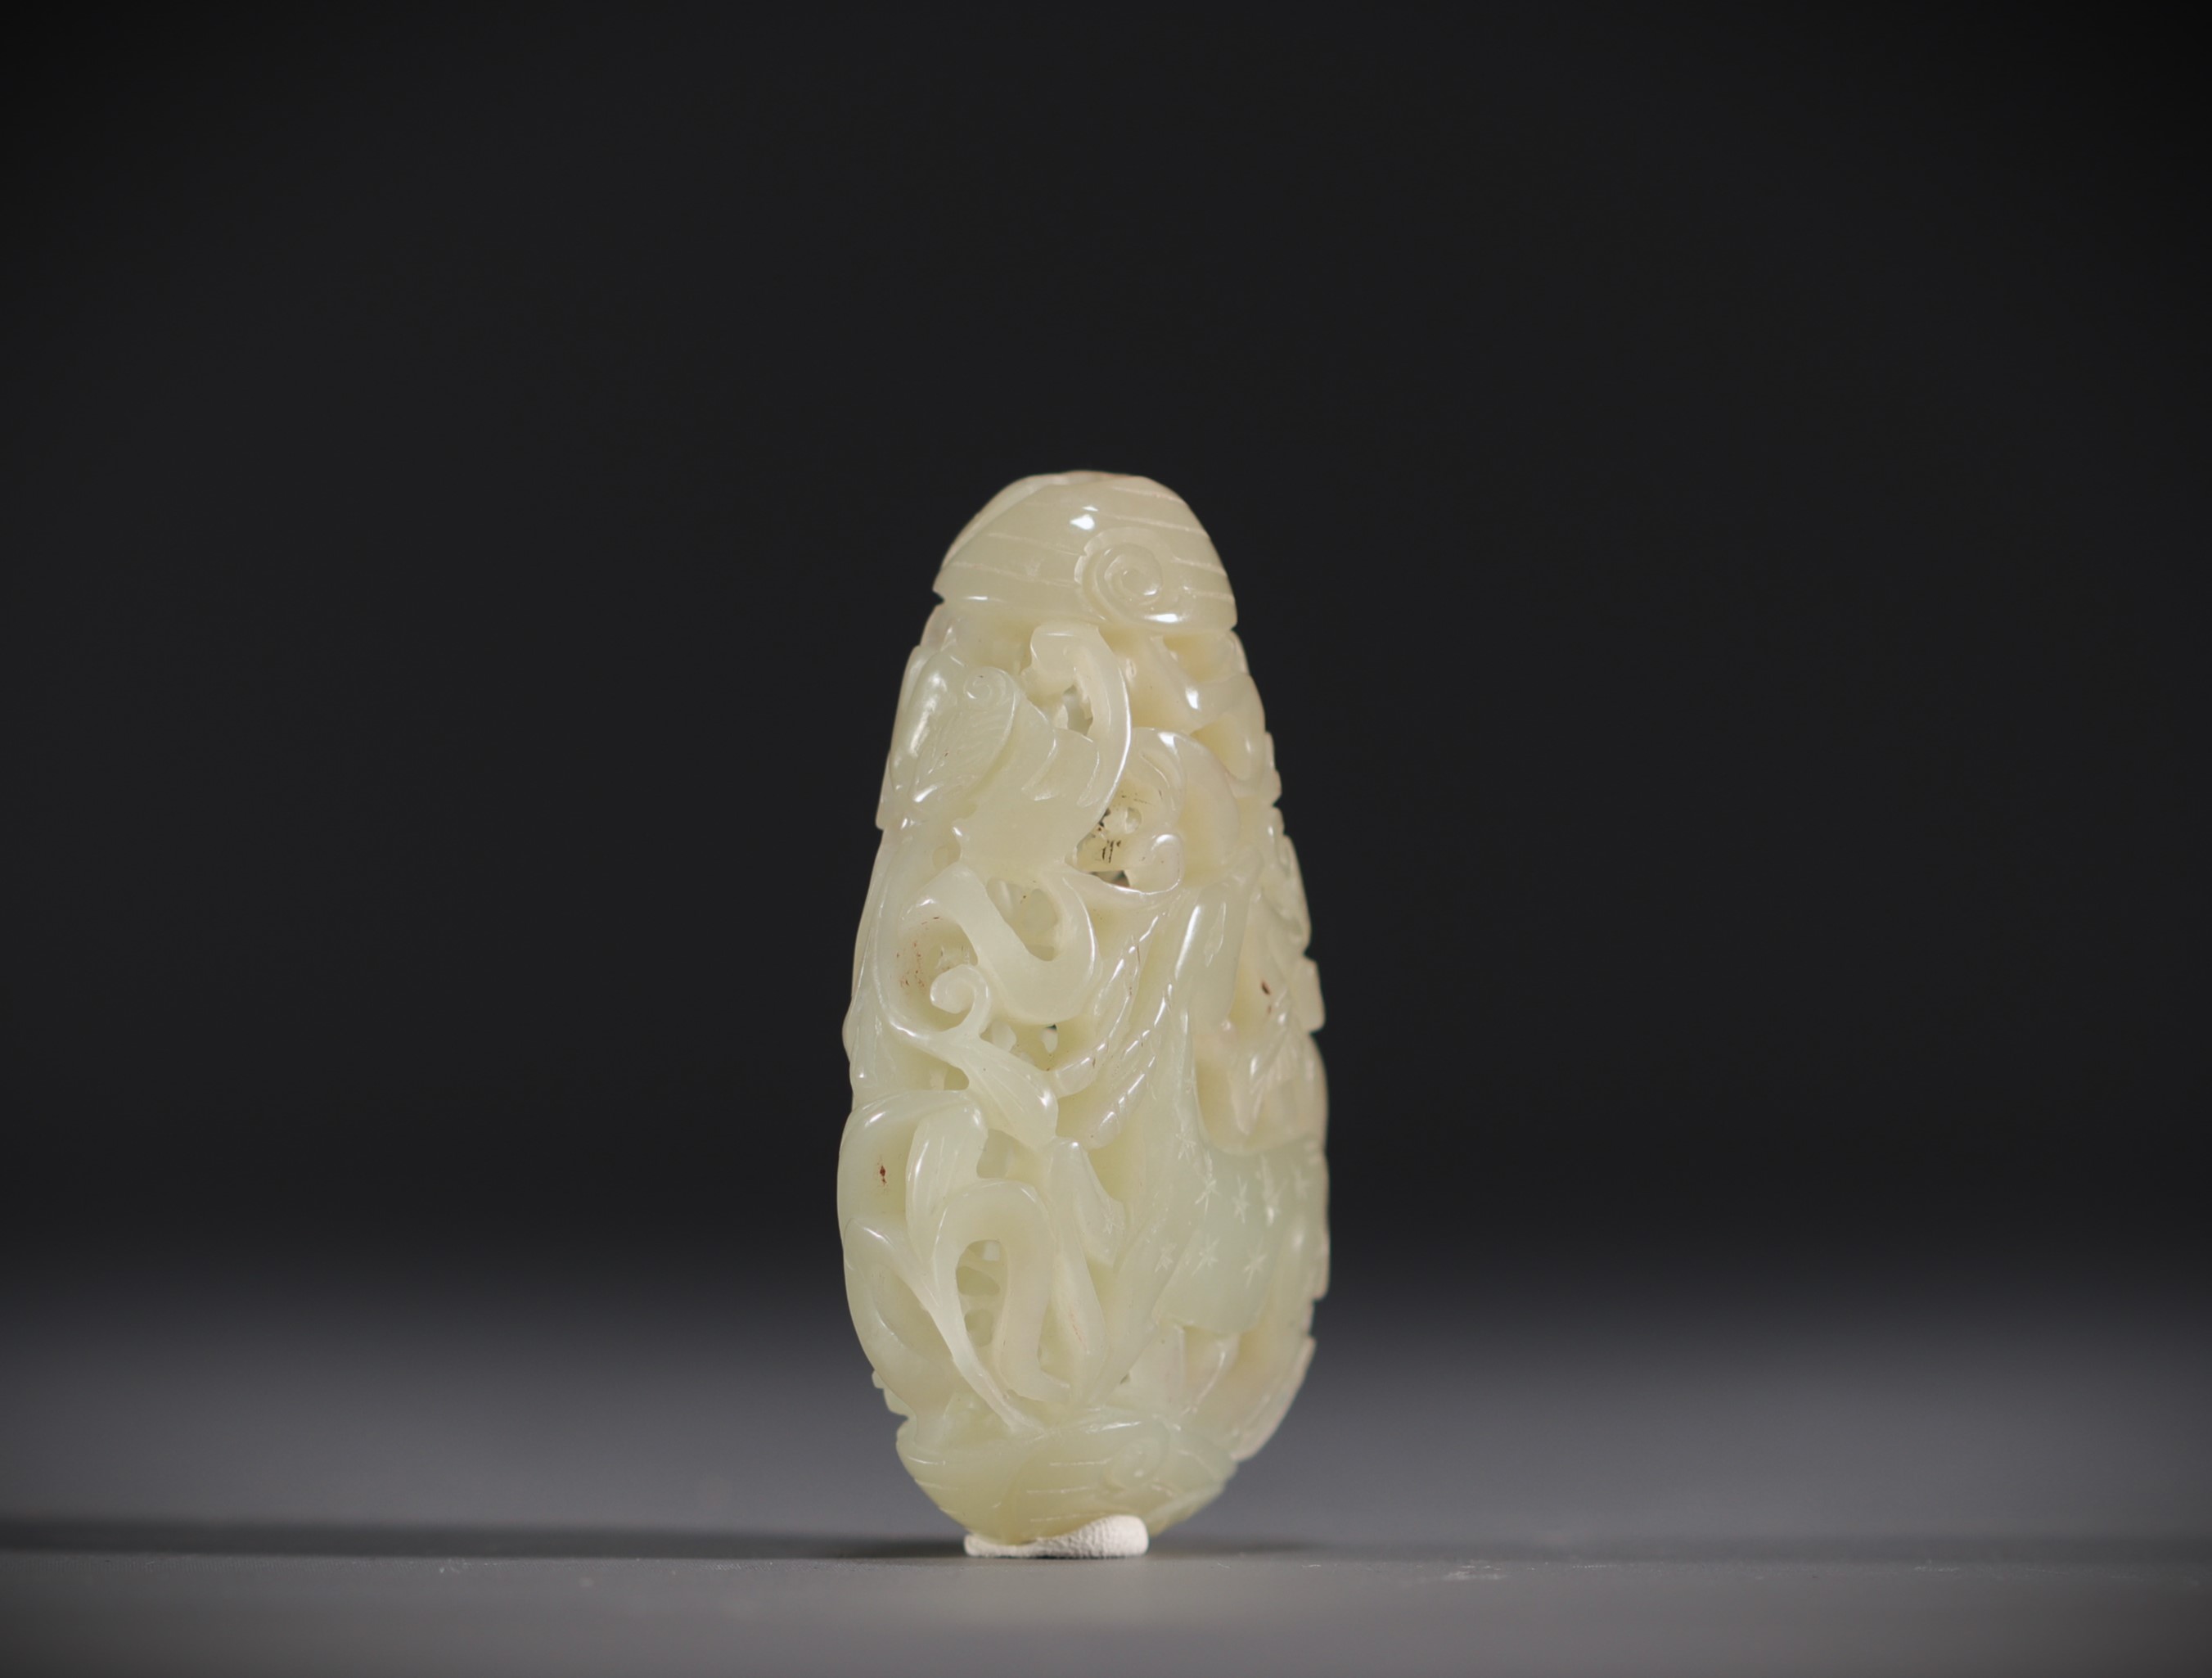 China - Carved and openworked white jade pendant with animal decoration, 18th century. - Image 3 of 3